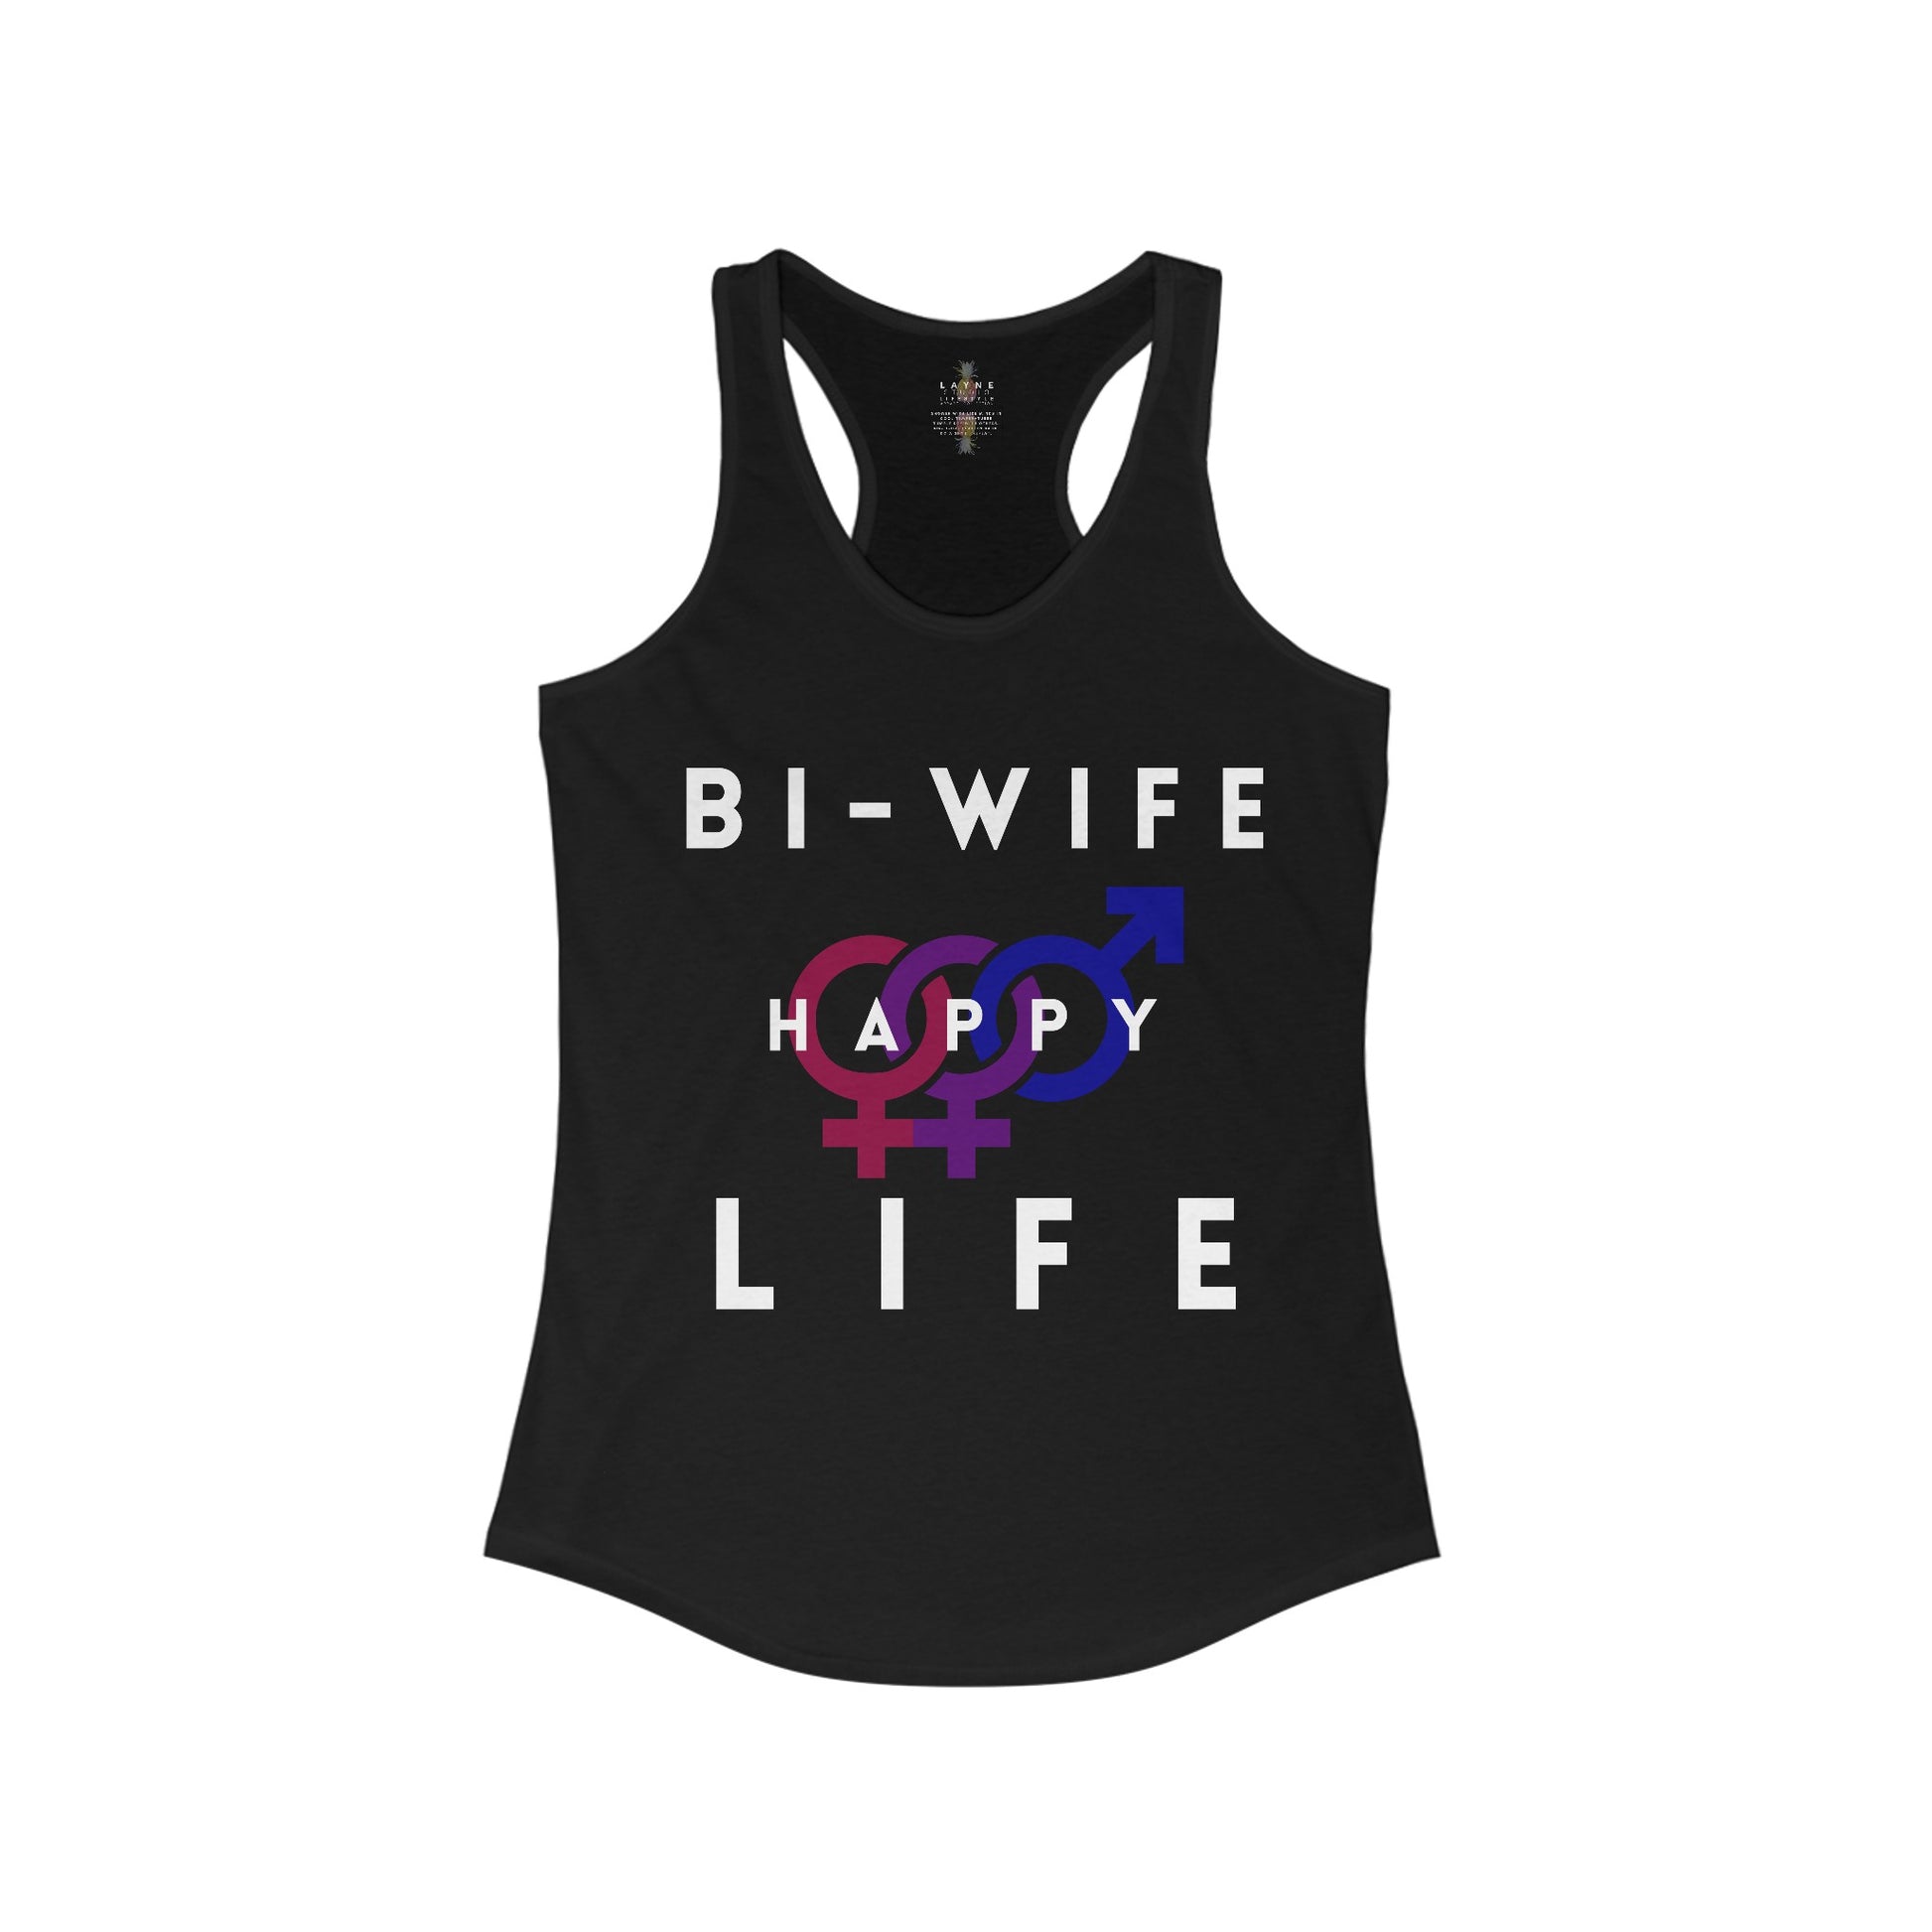 Front View of Layne Studios "Bi-Wife Happy Life" Graphic Solid Black Tank-Top